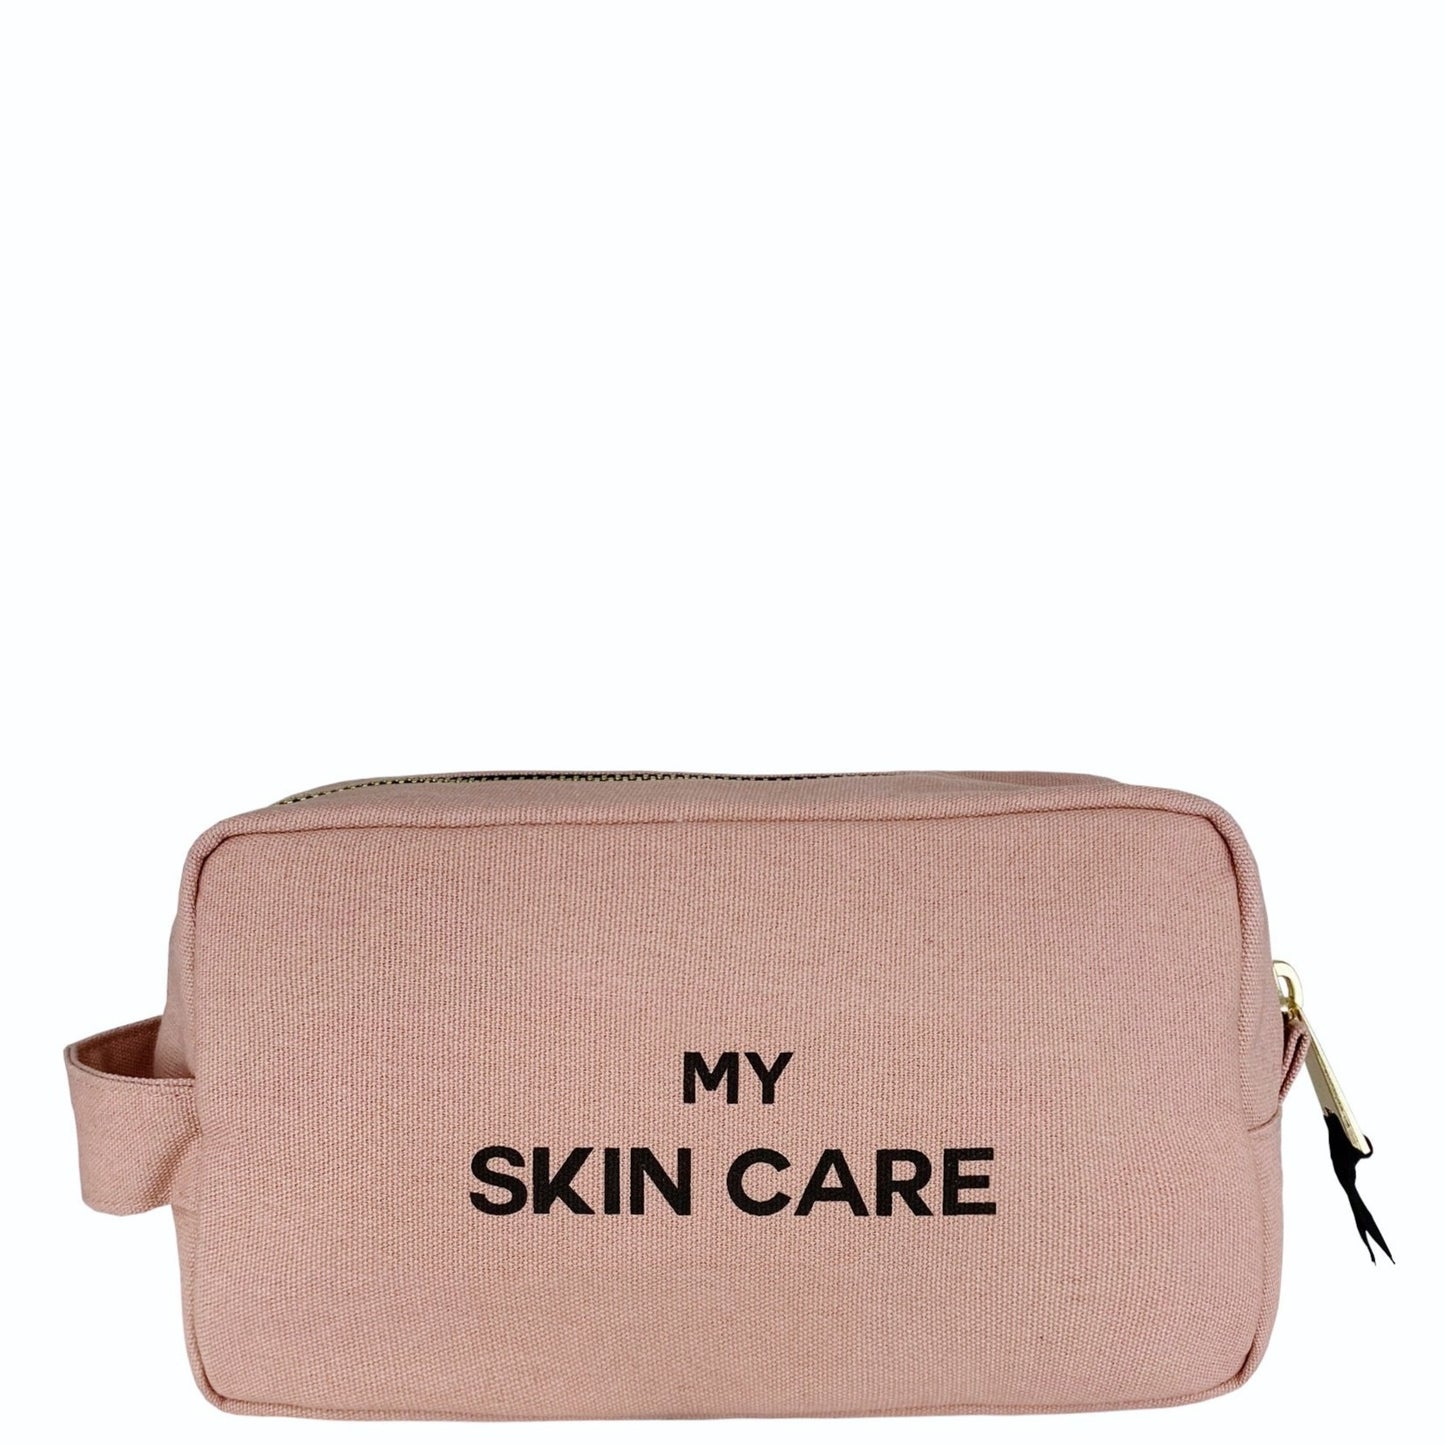 My Skin Care - Organizing Pouch, Coated Lining, Personalize, Pink/Blush - Bag-all